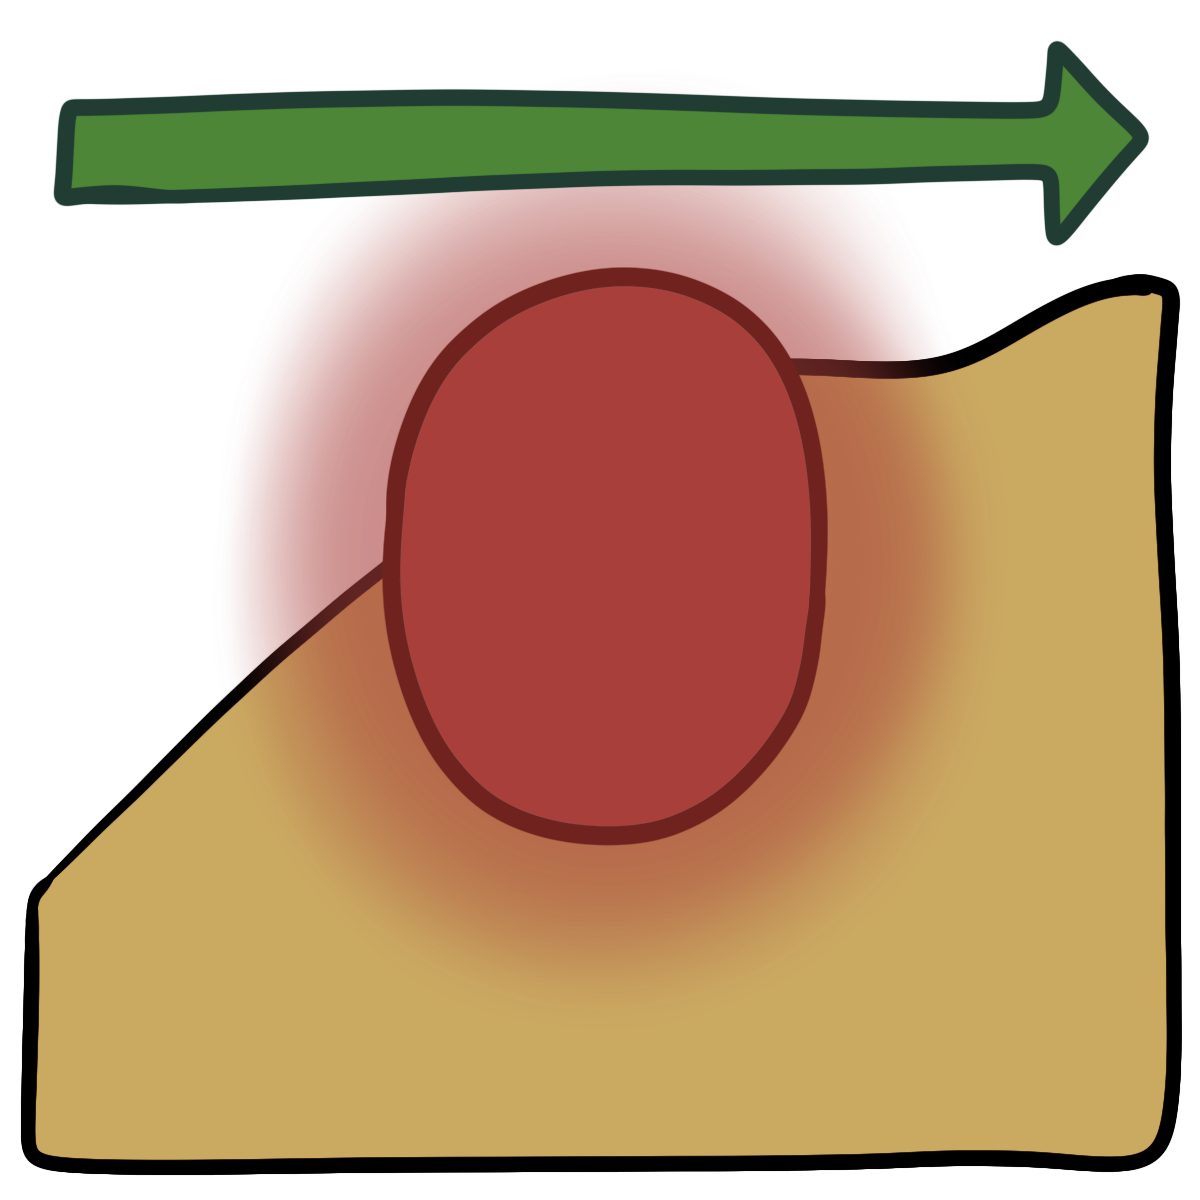 A thin green arrow pointing right above a glowing red oval. Curved yellow skin fills the bottom half of the background.